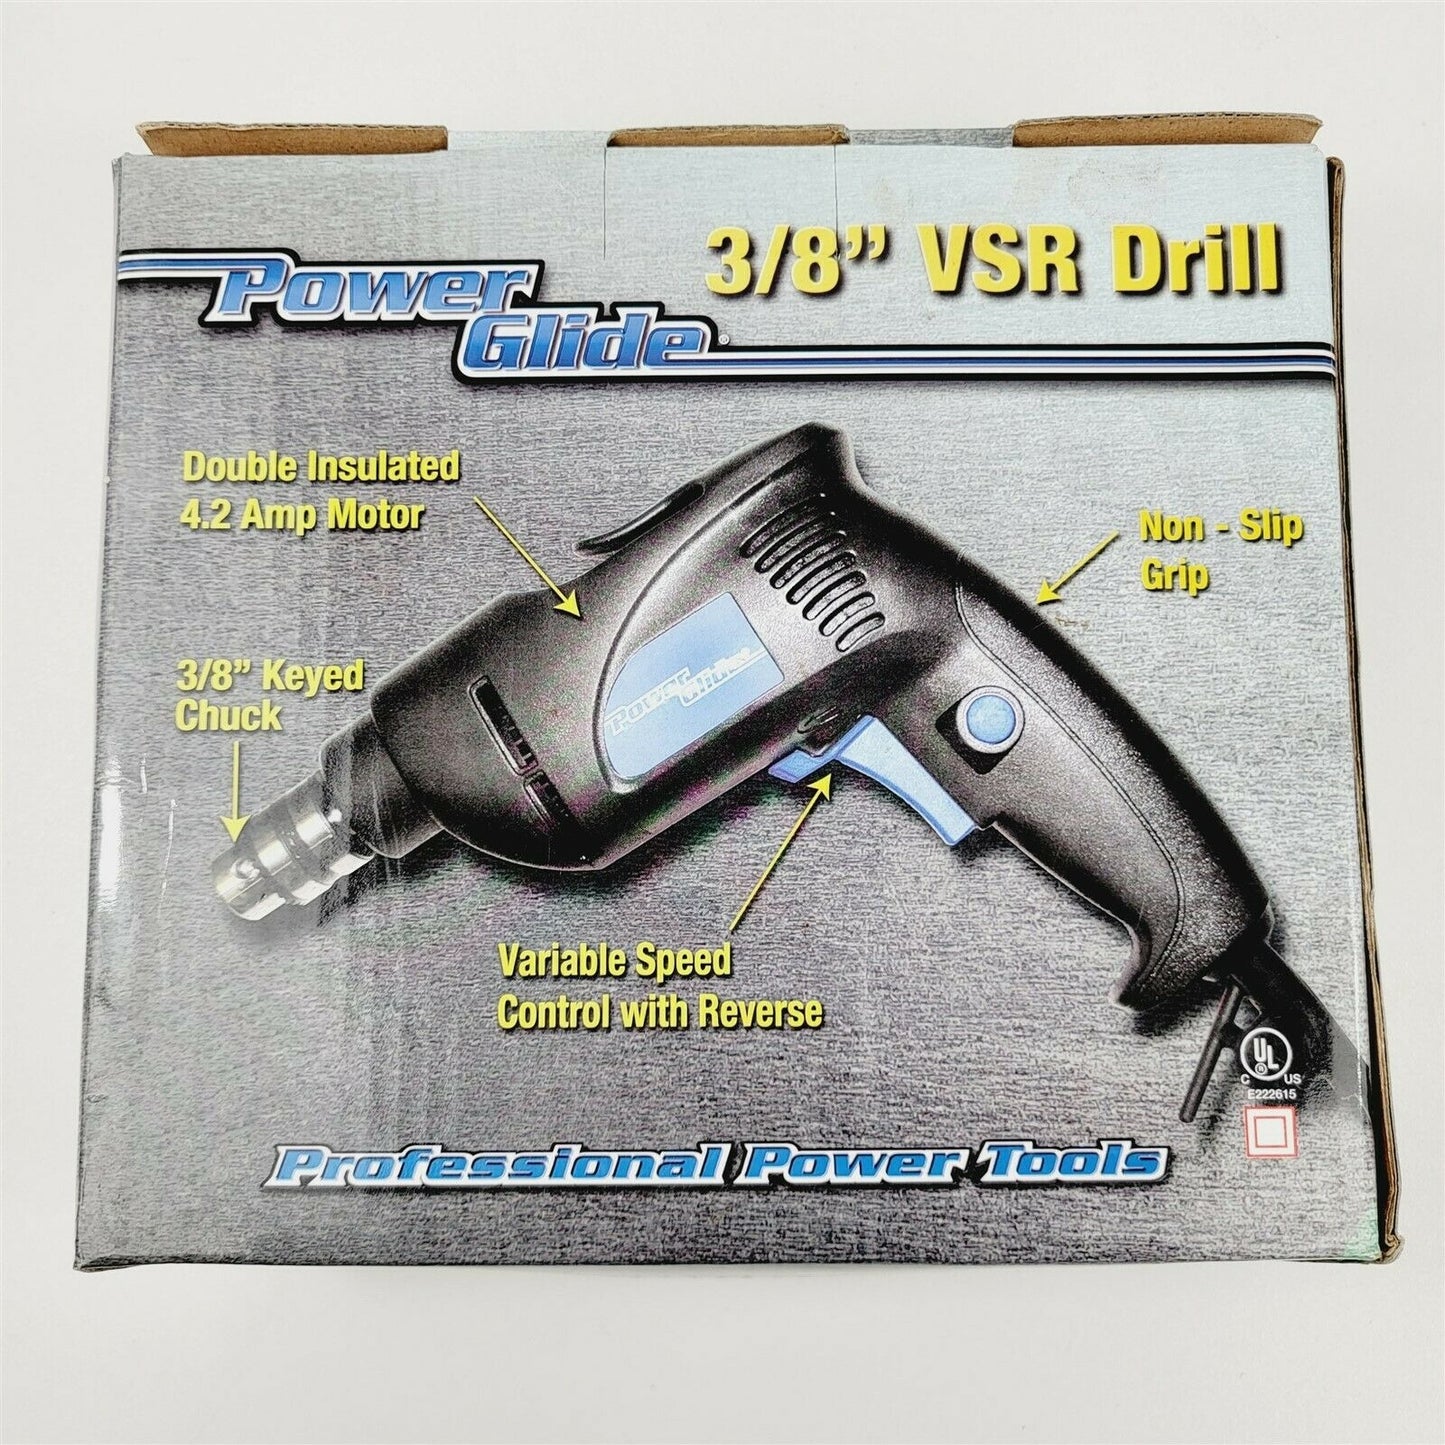 Power Glide 3/8" VSR Drill Professional Power Tools Corded Electric Drill